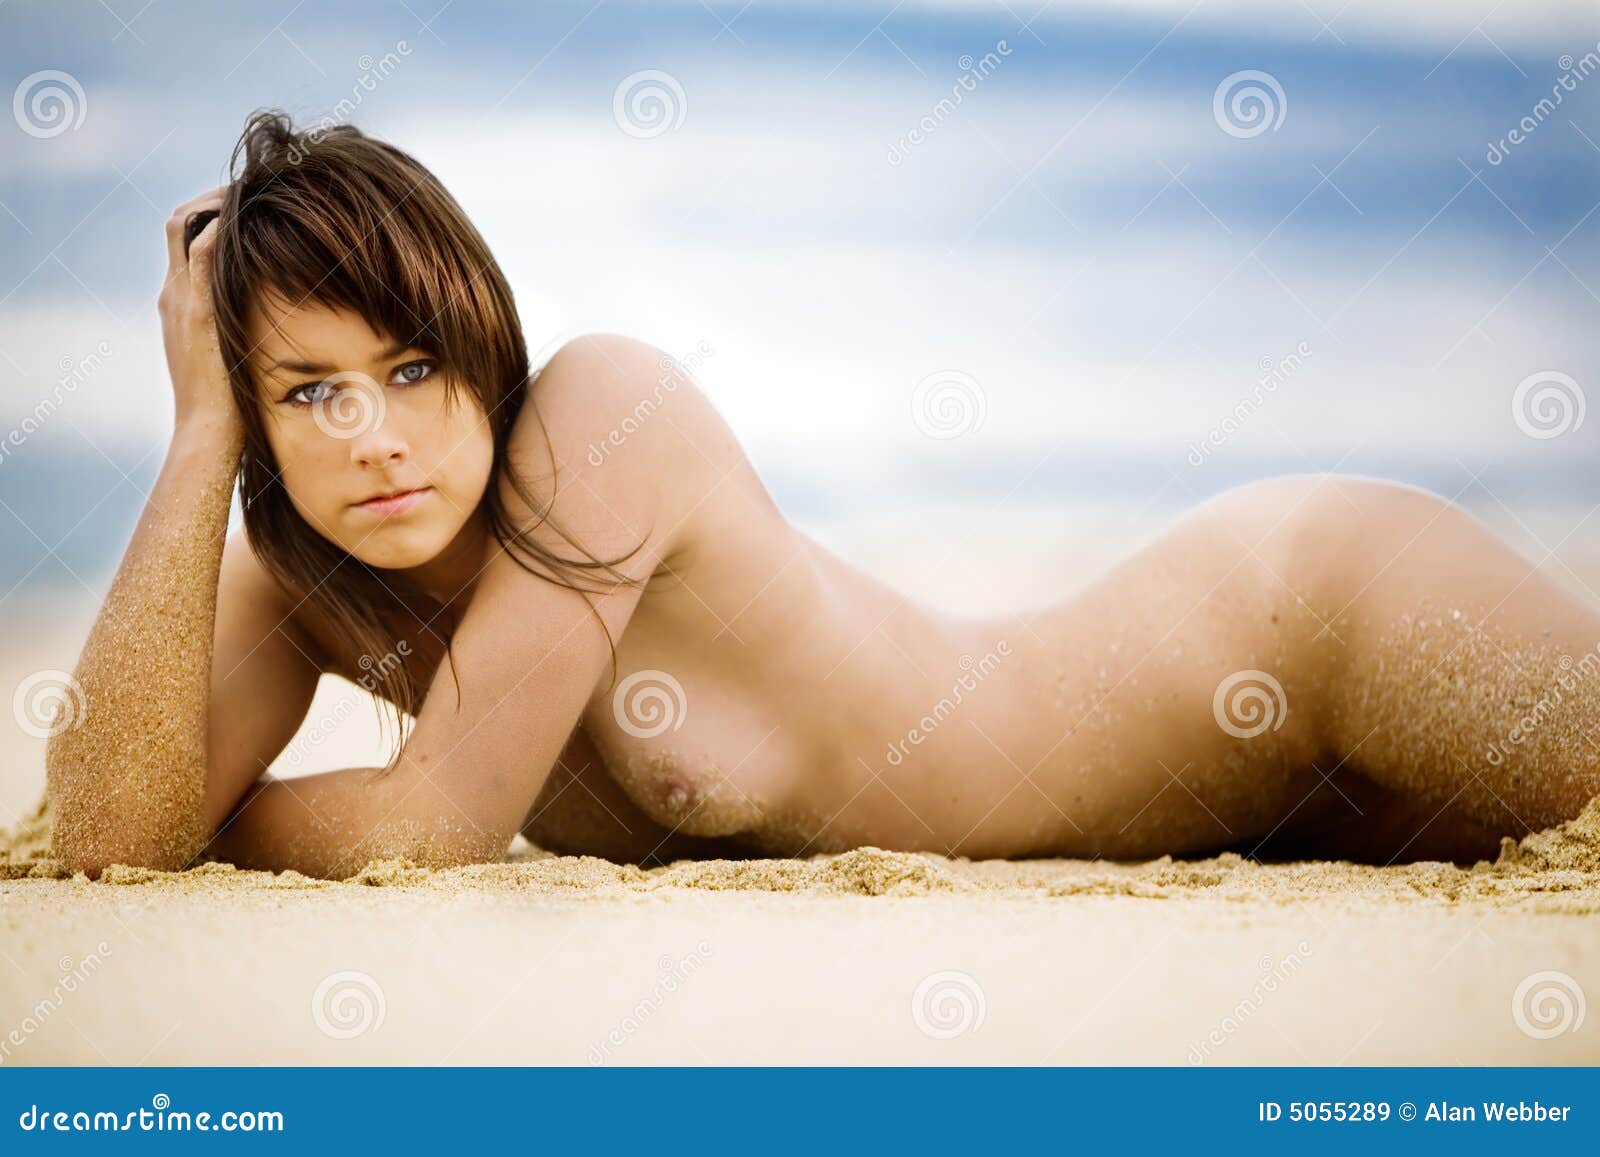 Nude girls laying down on the beach